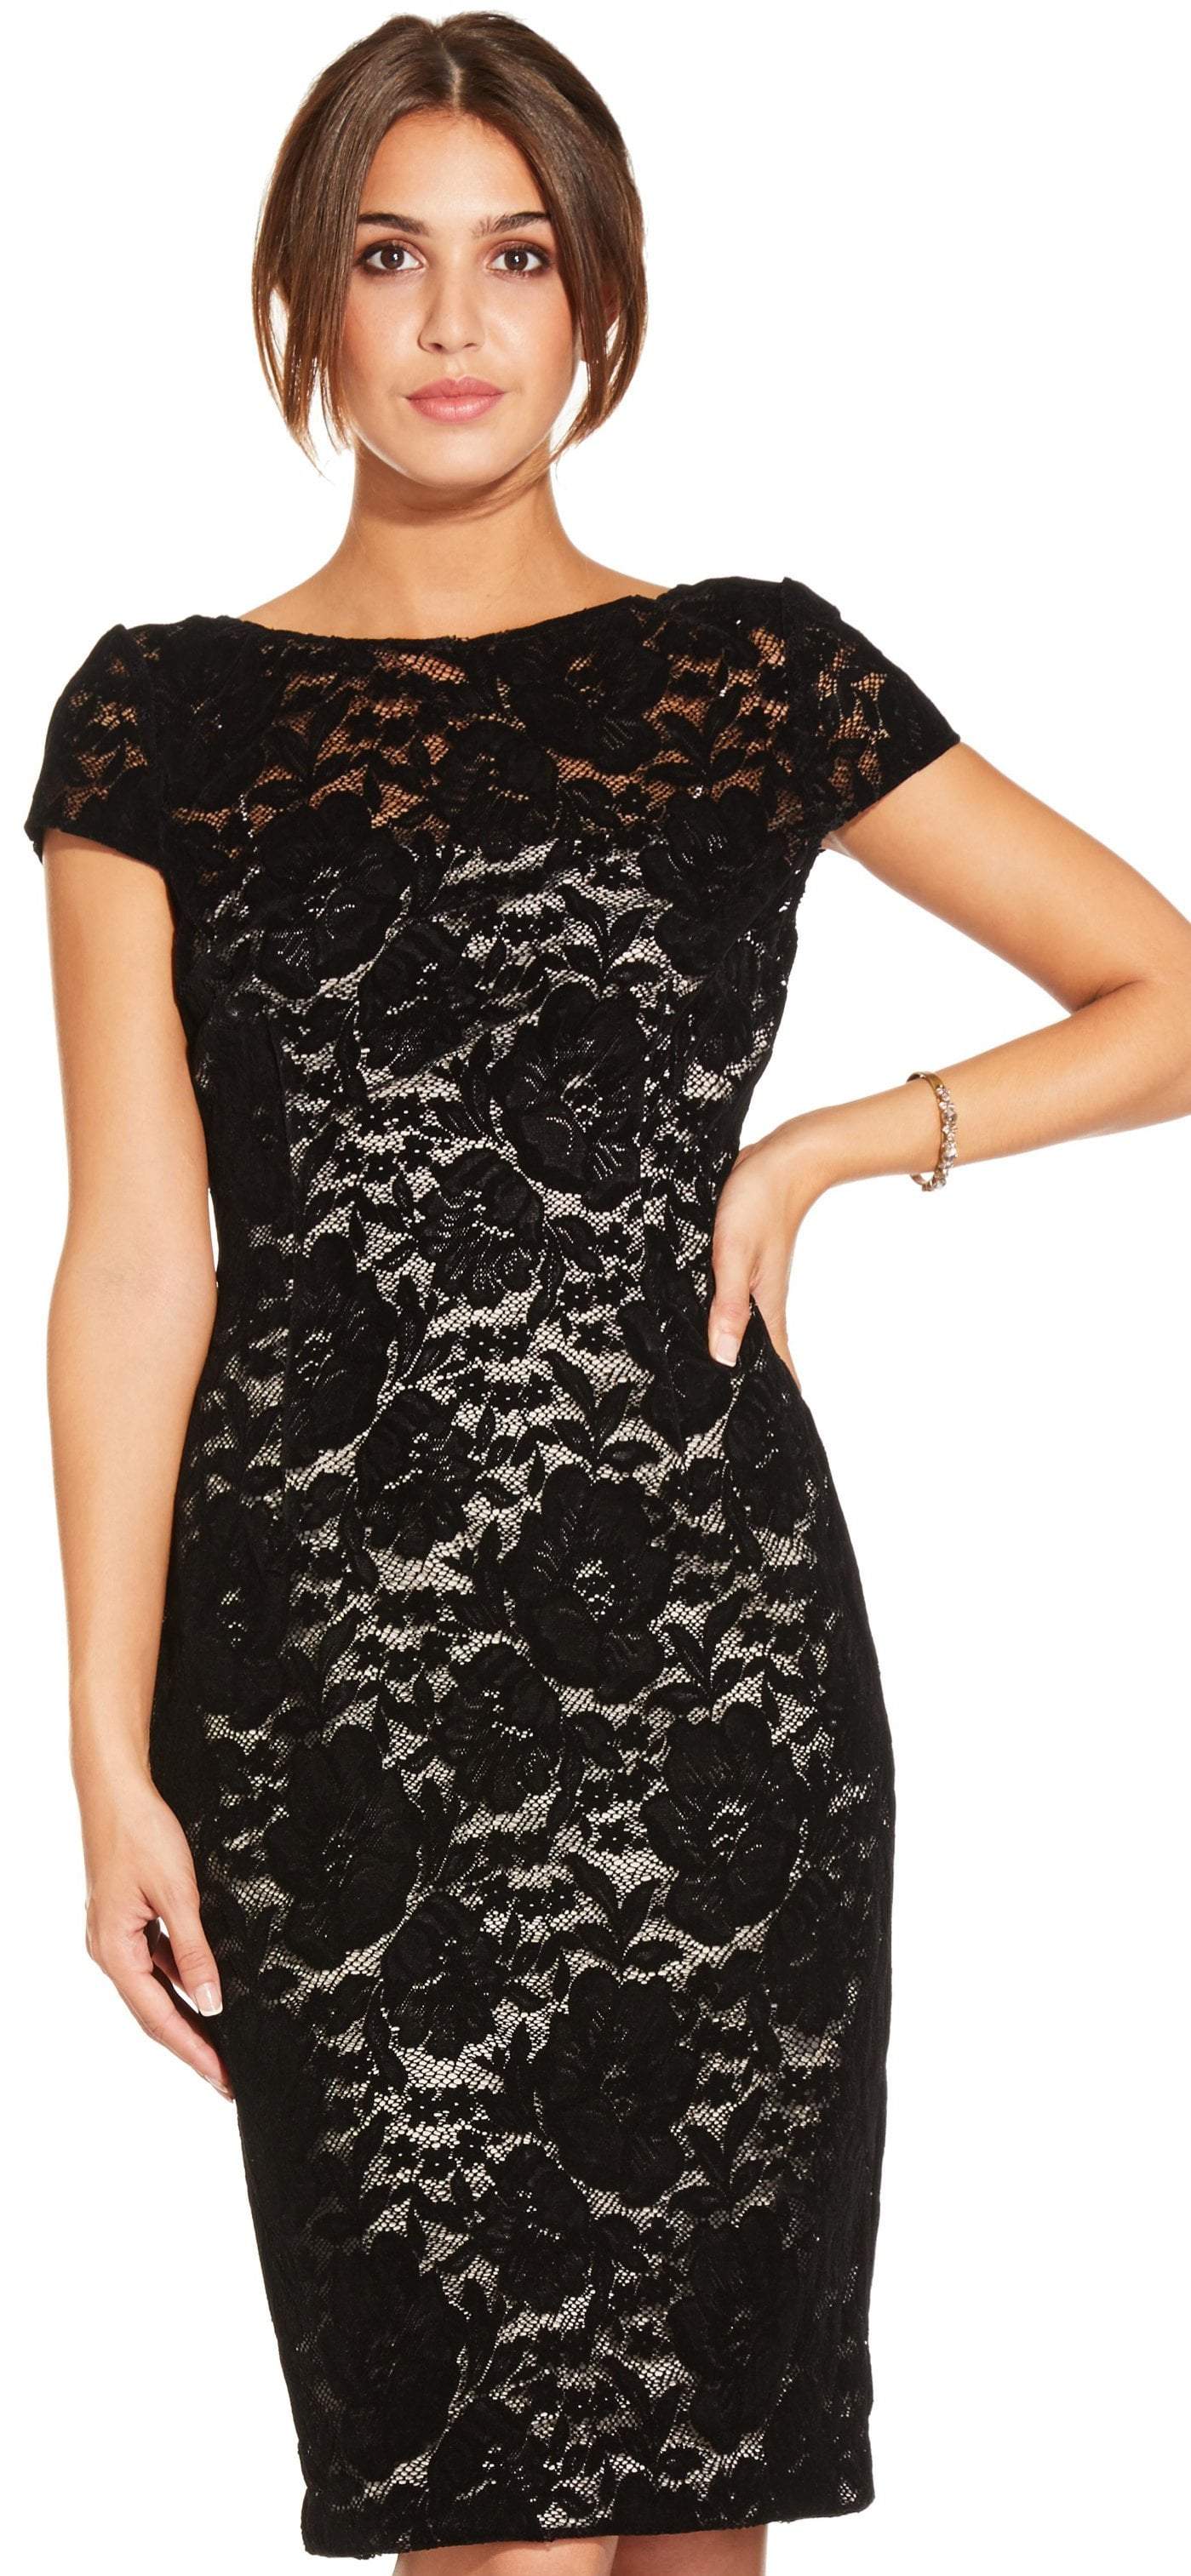 Adrianna Papell - AP1E204098 Floral Lace Cap Sleeve Sheath Dress In Black and Neutral